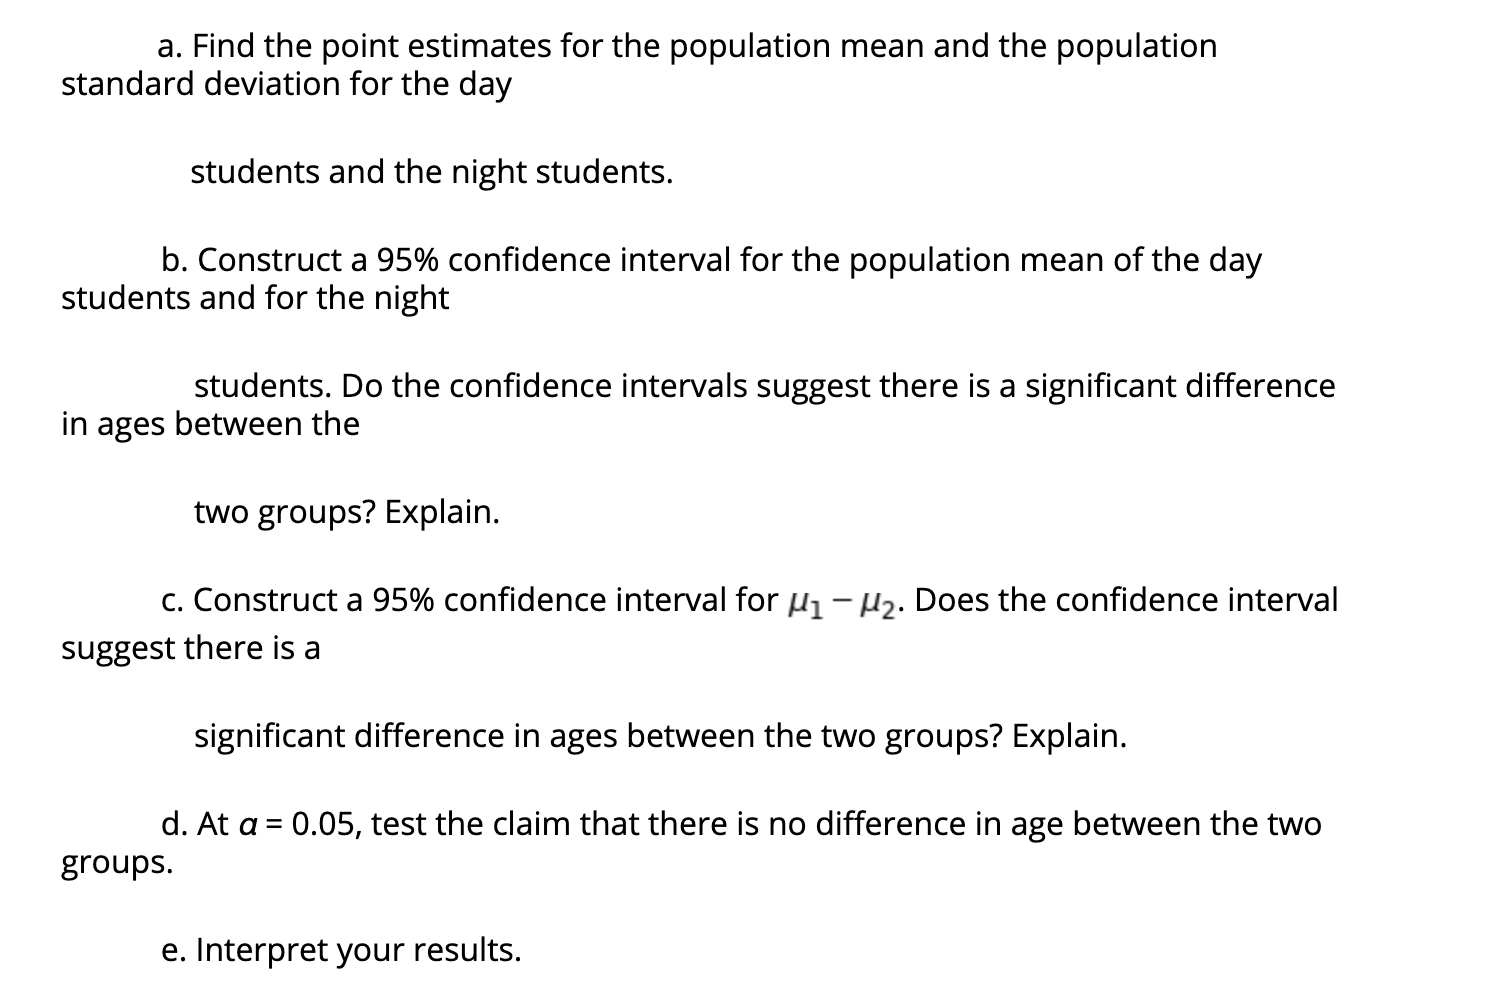 a. Find the point estimates for the population mean and the population
standard deviation for the day
students and the night students.
b. Construct a 95% confidence interval for the population mean of the day
students and for the night
students. Do the confidence intervals suggest there is a significant difference
in ages between the
two groups? Explain.
c. Construct a 95% confidence interval for µ1- H2. Does the confidence interval
suggest there is a
significant difference in ages between the two groups? Explain.
d. At a = 0.05, test the claim that there is no difference in age between the two
groups.
e. Interpret your results.
